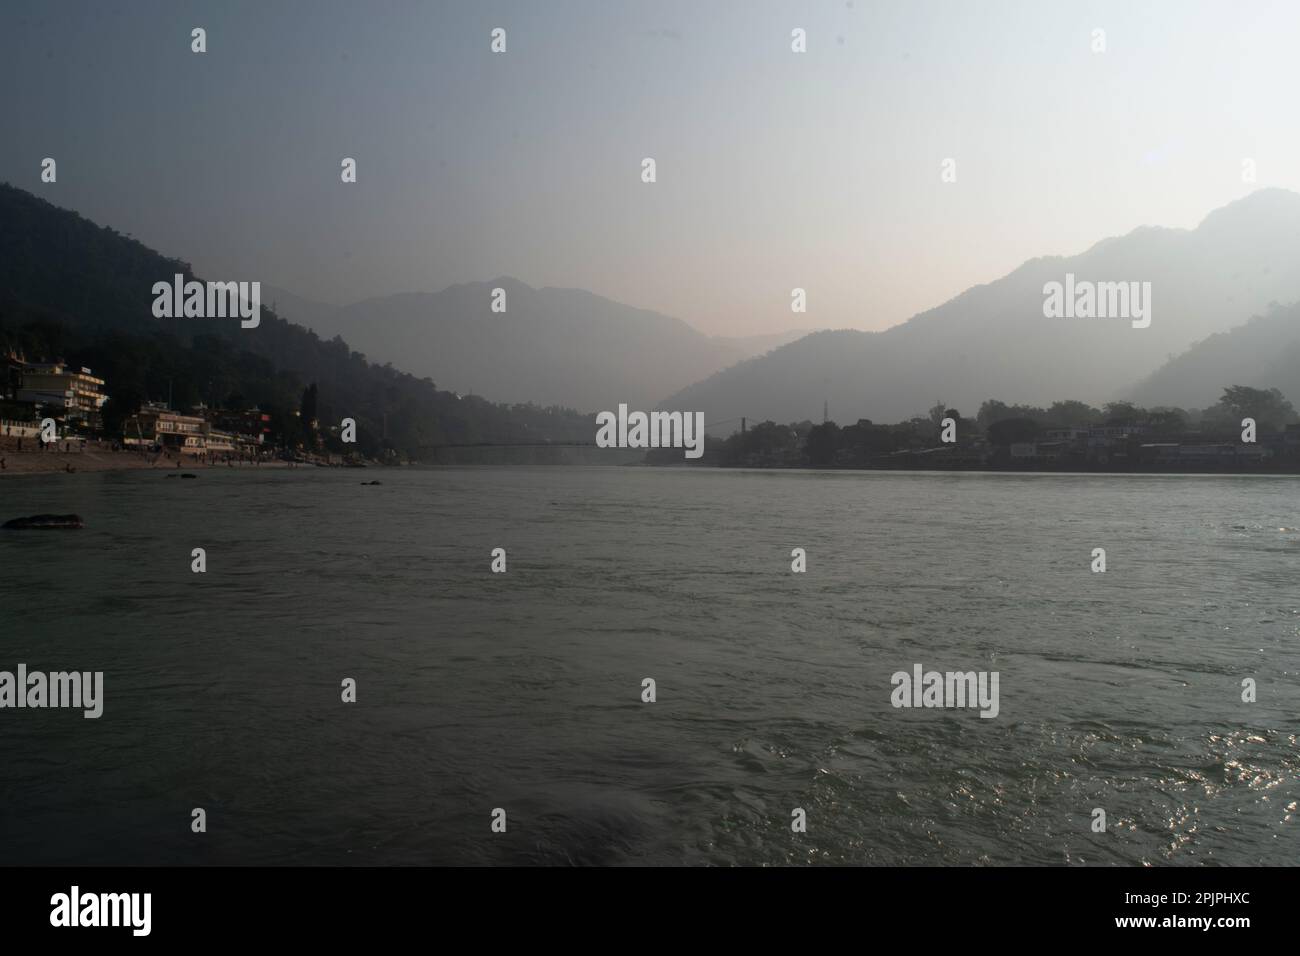 Winter view of holy river ganga and mountains in india Stock Photo